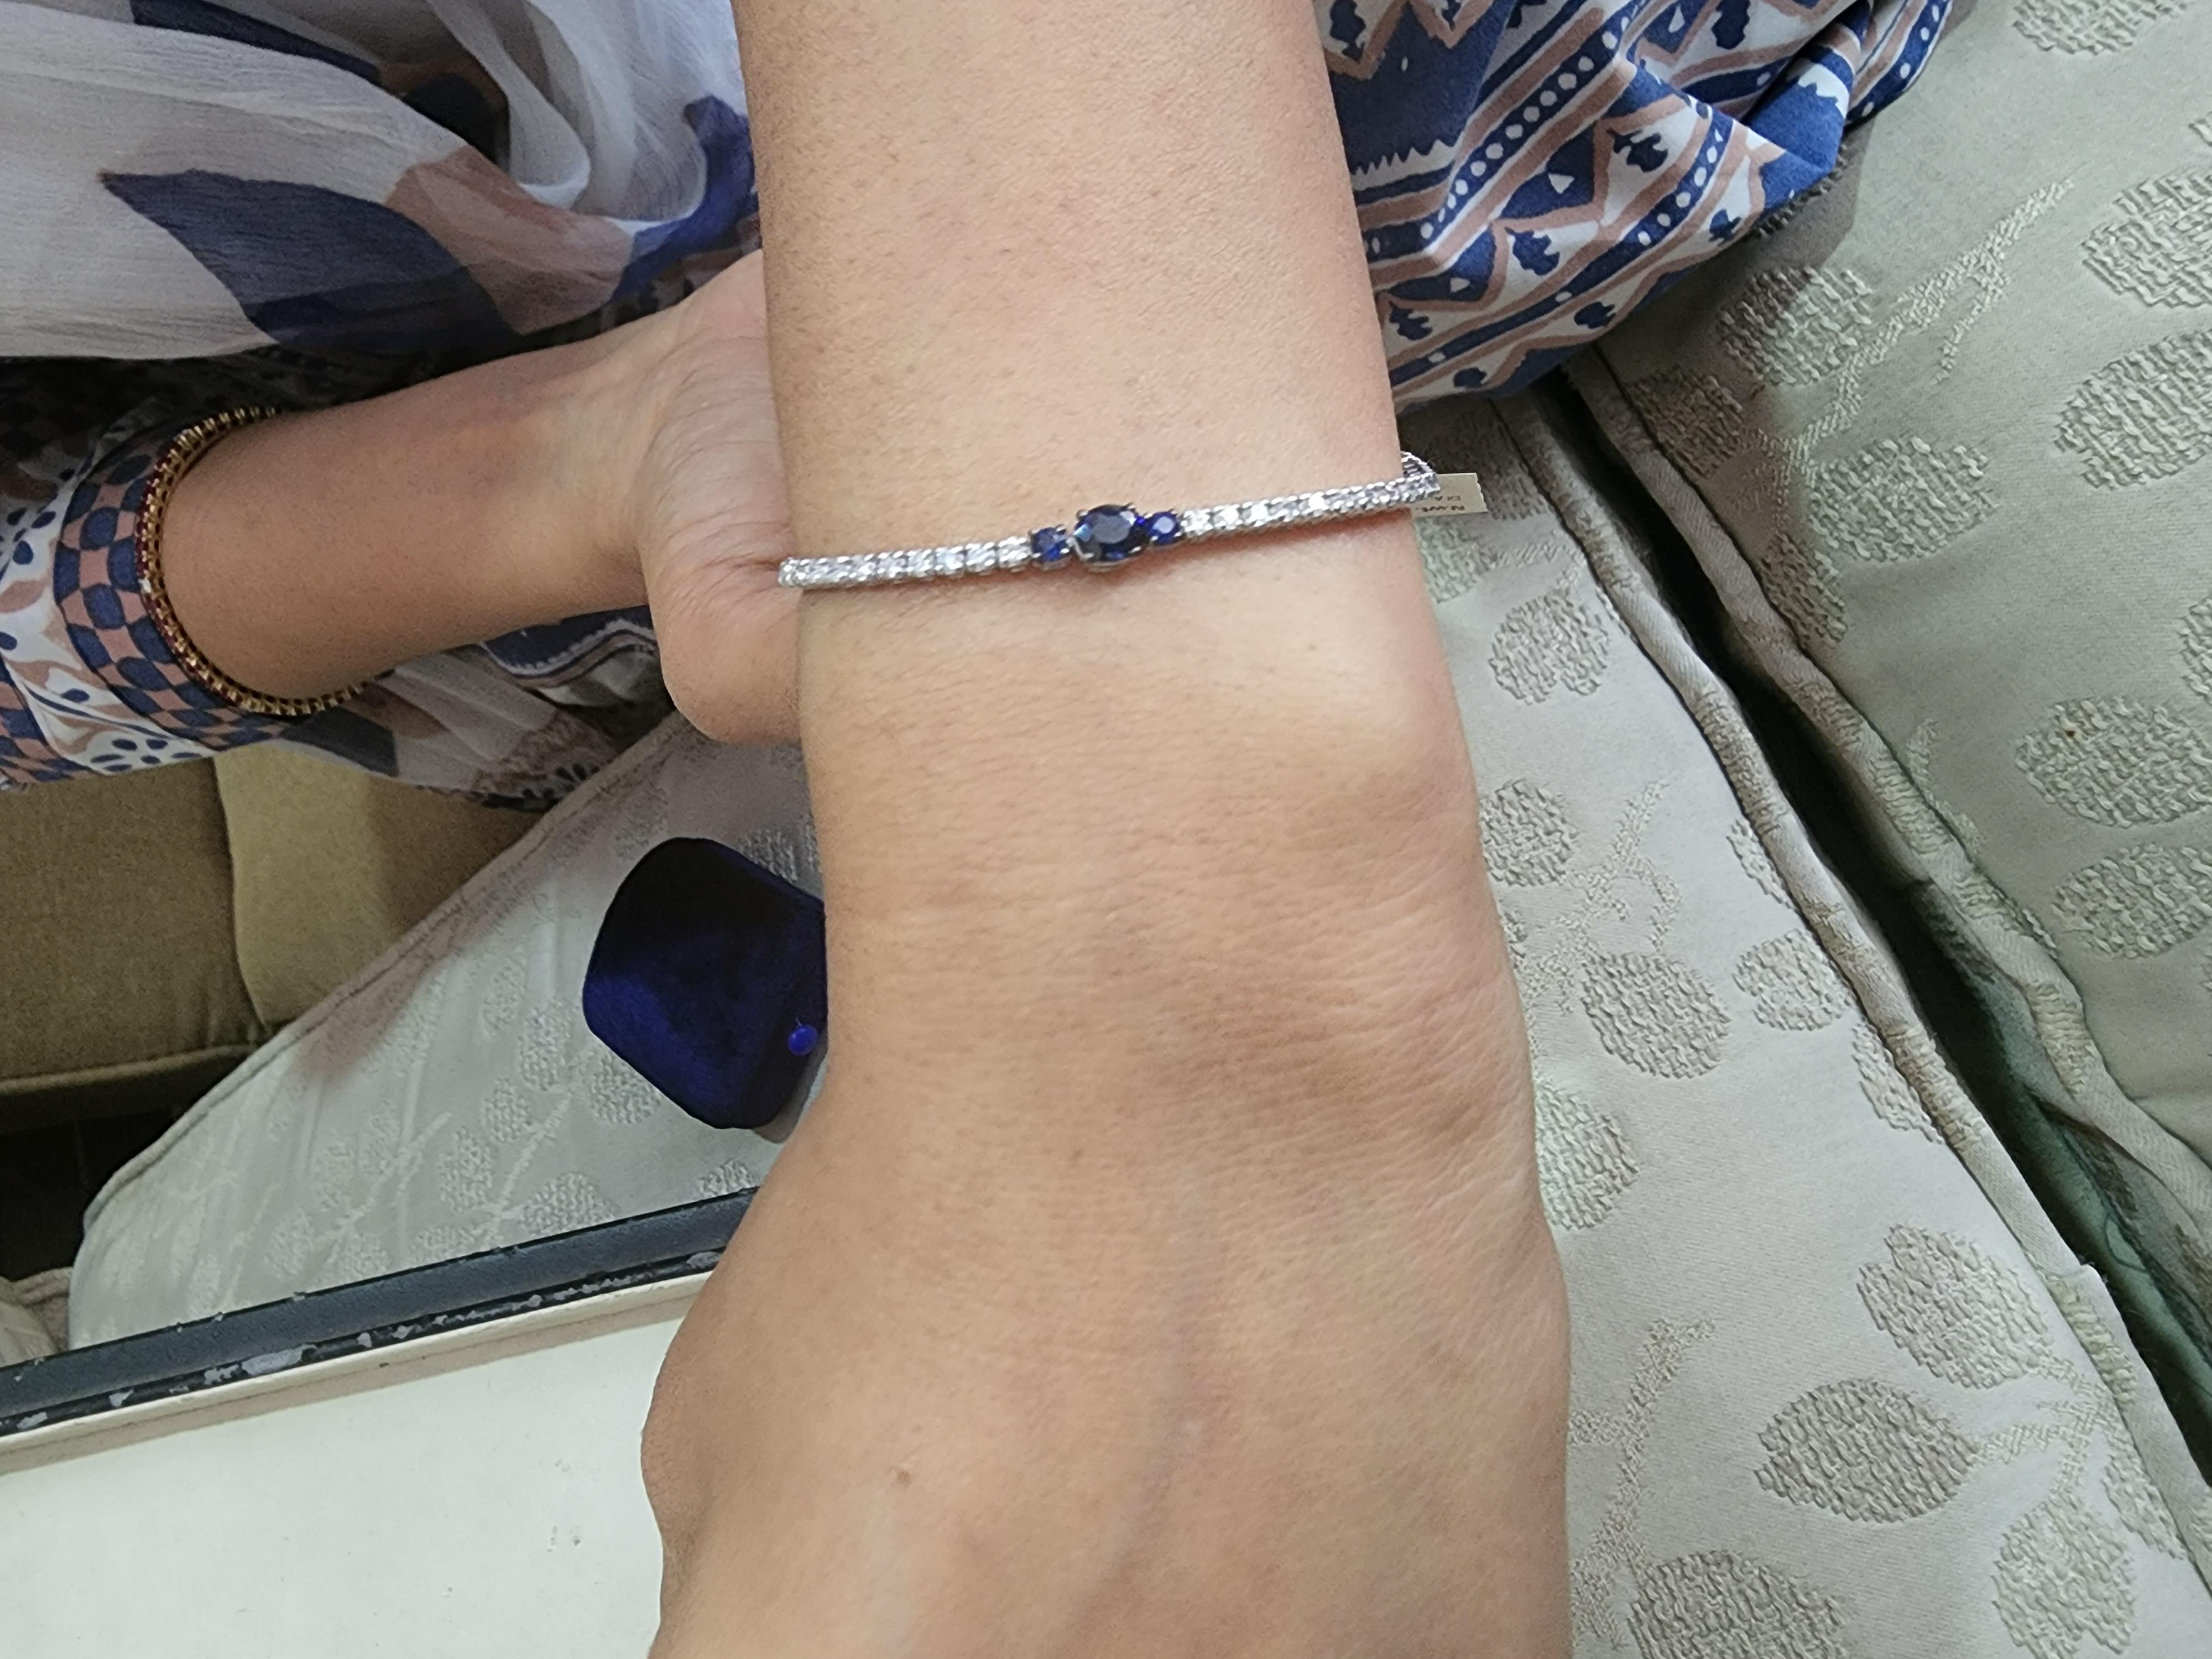 This is an amazing natural blue sapphire tennis bracelet with 1.67 carats of blue sapphire and white diamond are 1.47 carats. Gold Weight is 6.98 gms (18k)

It’s very hard to capture the true color and luster of the stone, I have tried to add